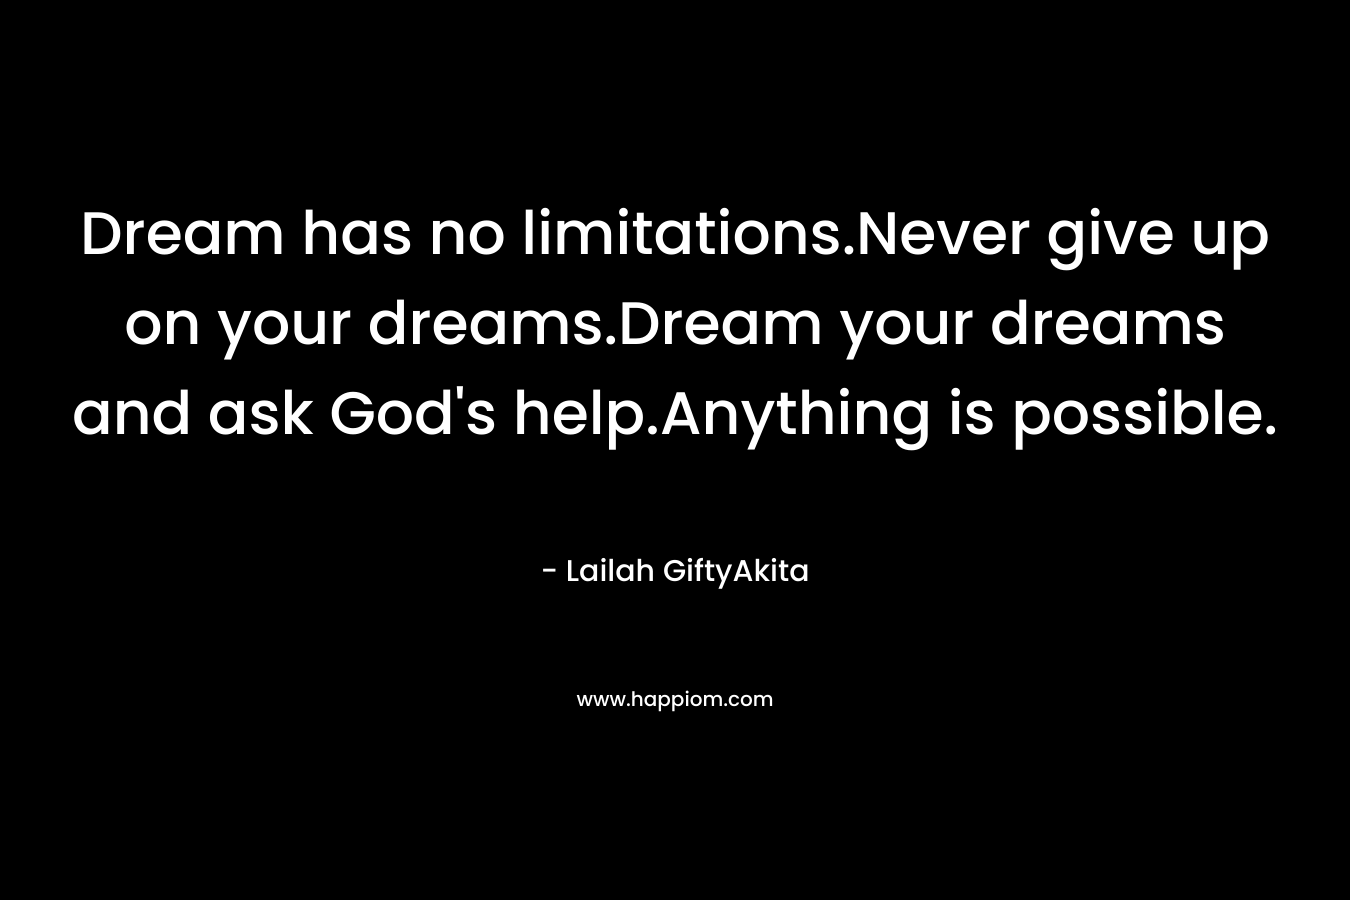 Dream has no limitations.Never give up on your dreams.Dream your dreams and ask God's help.Anything is possible.